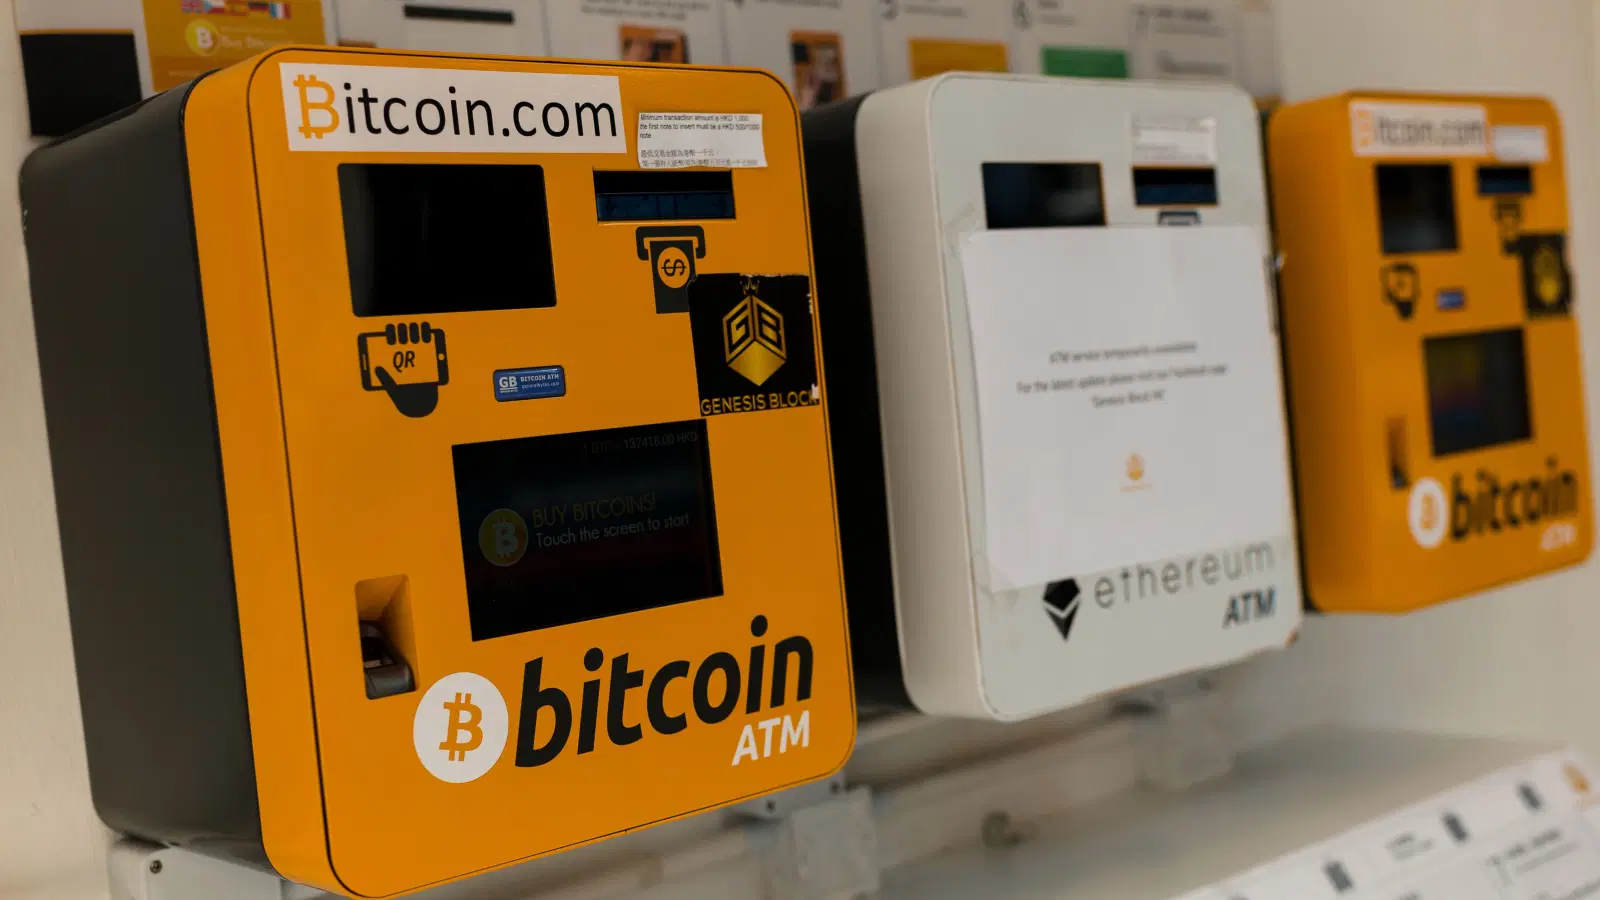 How to Download Bitcoin ATM App on Your Androids and iOS? – Some Major Steps